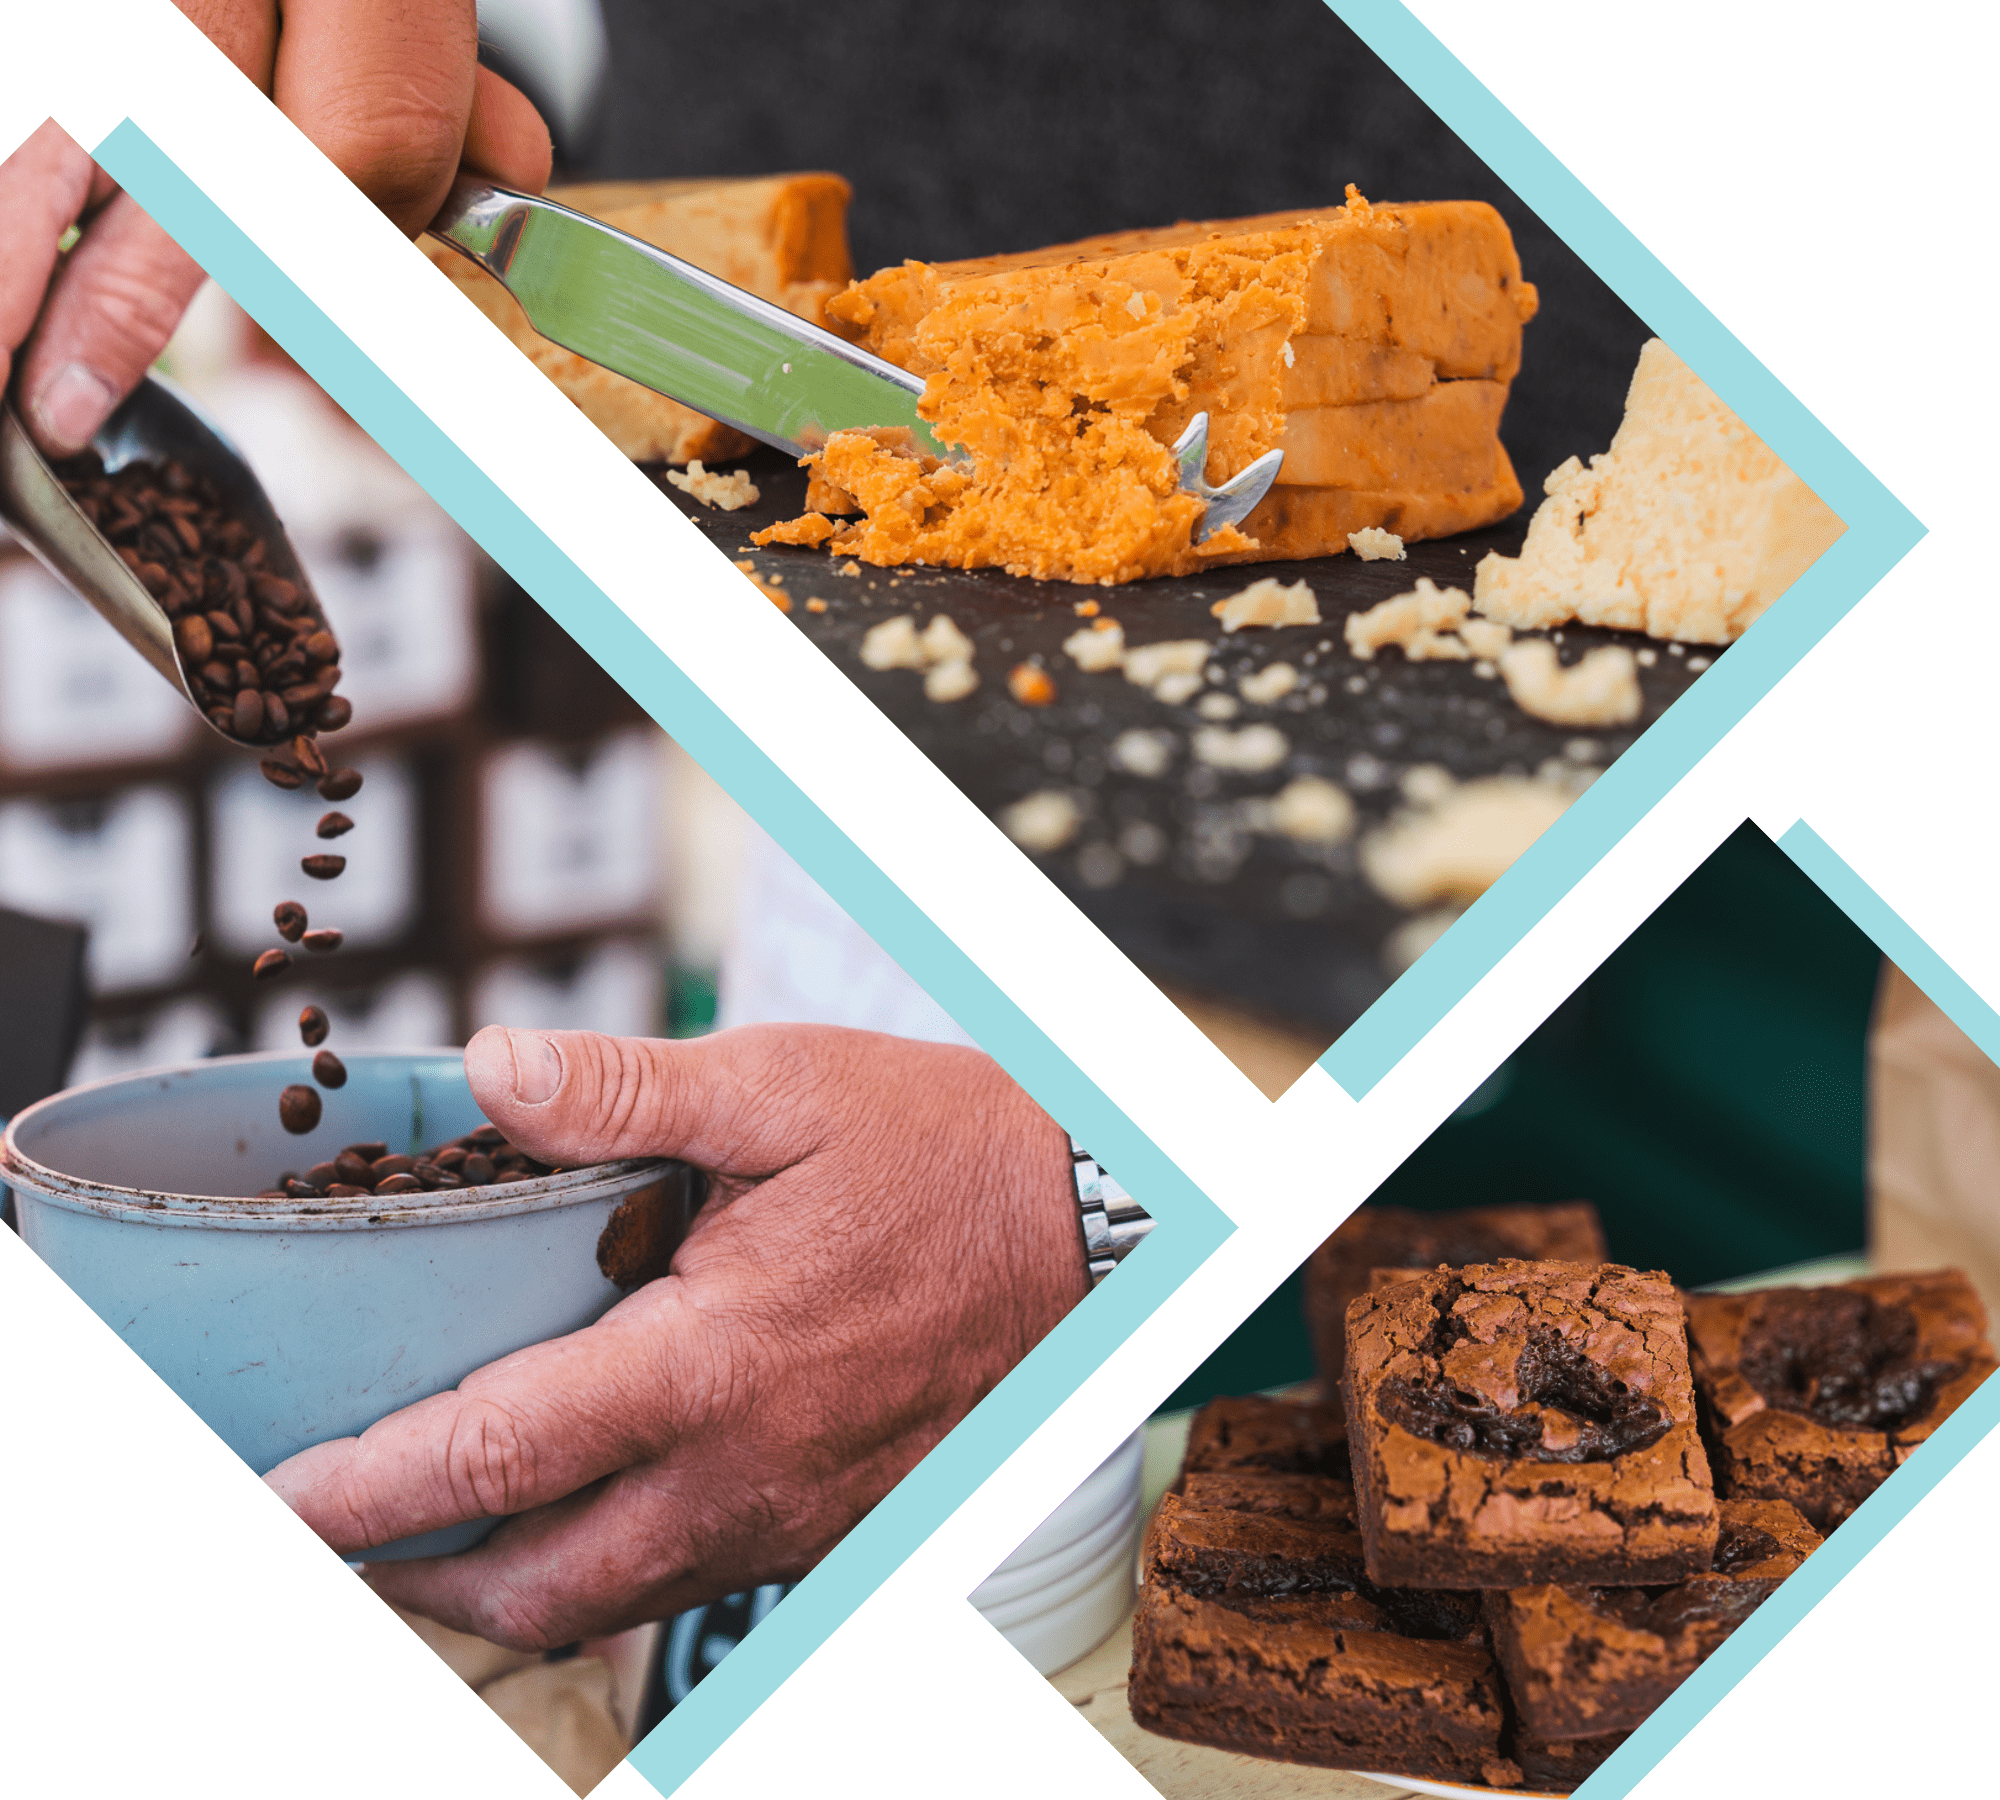 Local producers of Artisan food including cheeses, brownies, sauces, preserves and pickles, olives and oils, bakes and cakes